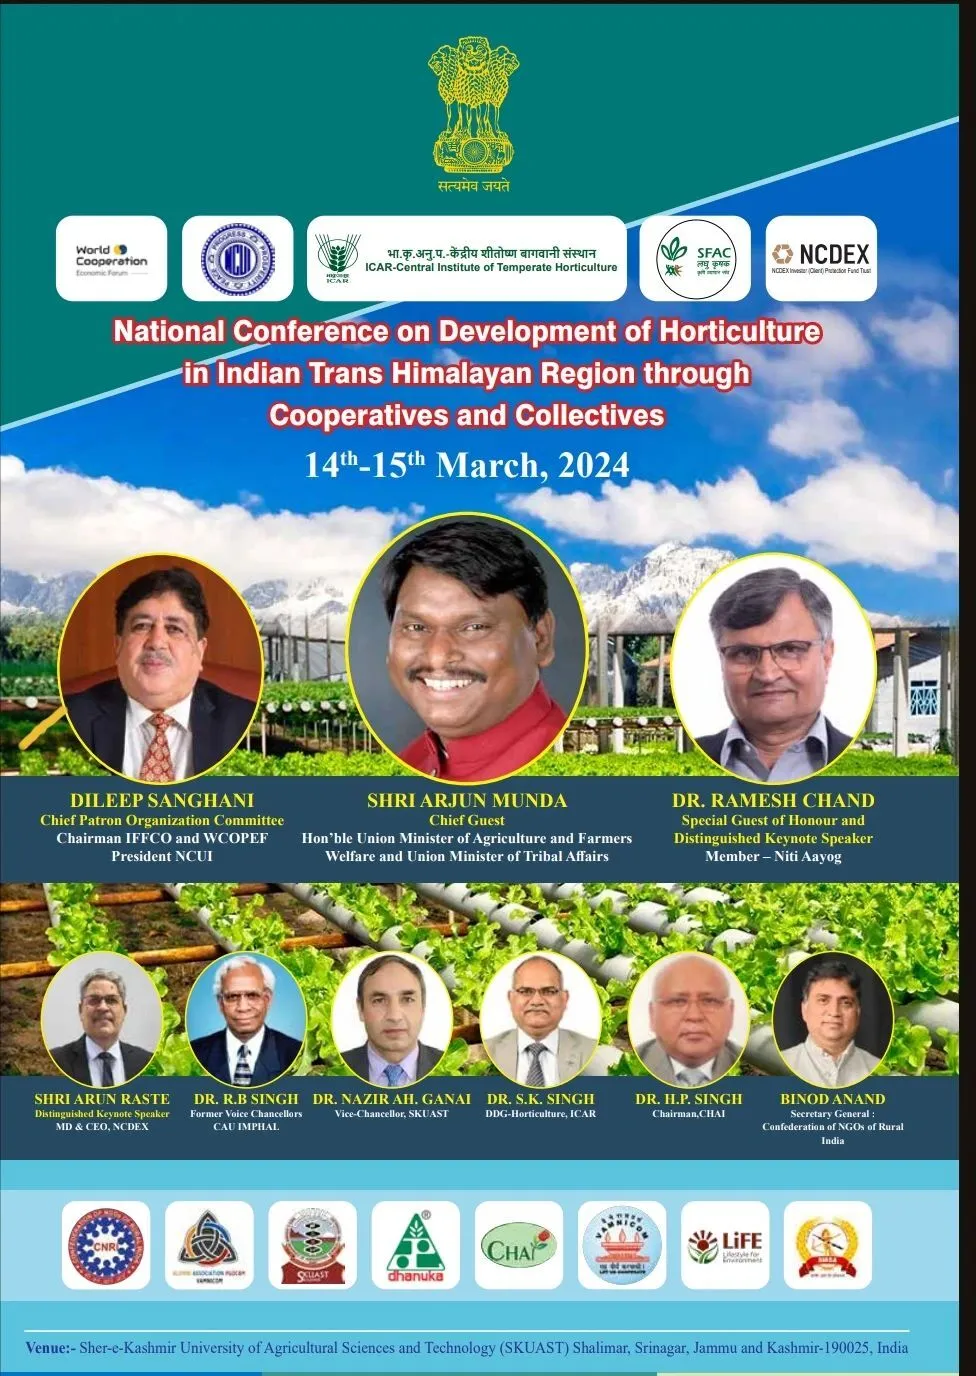 National Conference on Development of Horticulture in Indian Trans-Himalayan Region Through Cooperatives and Collectives